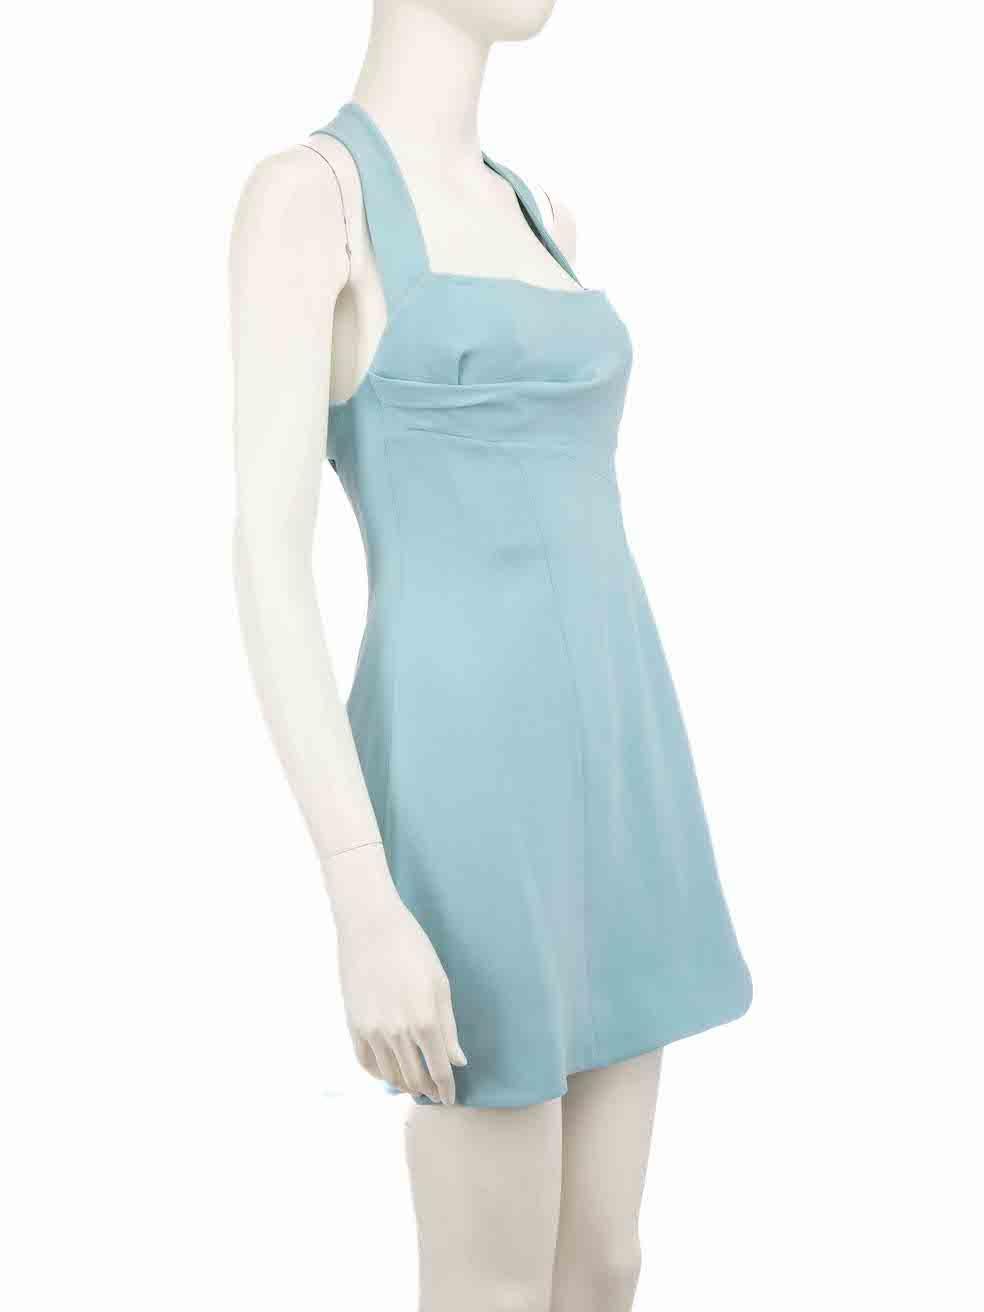 CONDITION is Very good. Minimal wear to dress is evident. Minimal wear to the front with small mark on this used Rachel Gilbert designer resale item.
 
 Details
 Light blue
 Synthetic
 Dress
 Sleeveless
 Square neck
 Back crystallised knot detail
